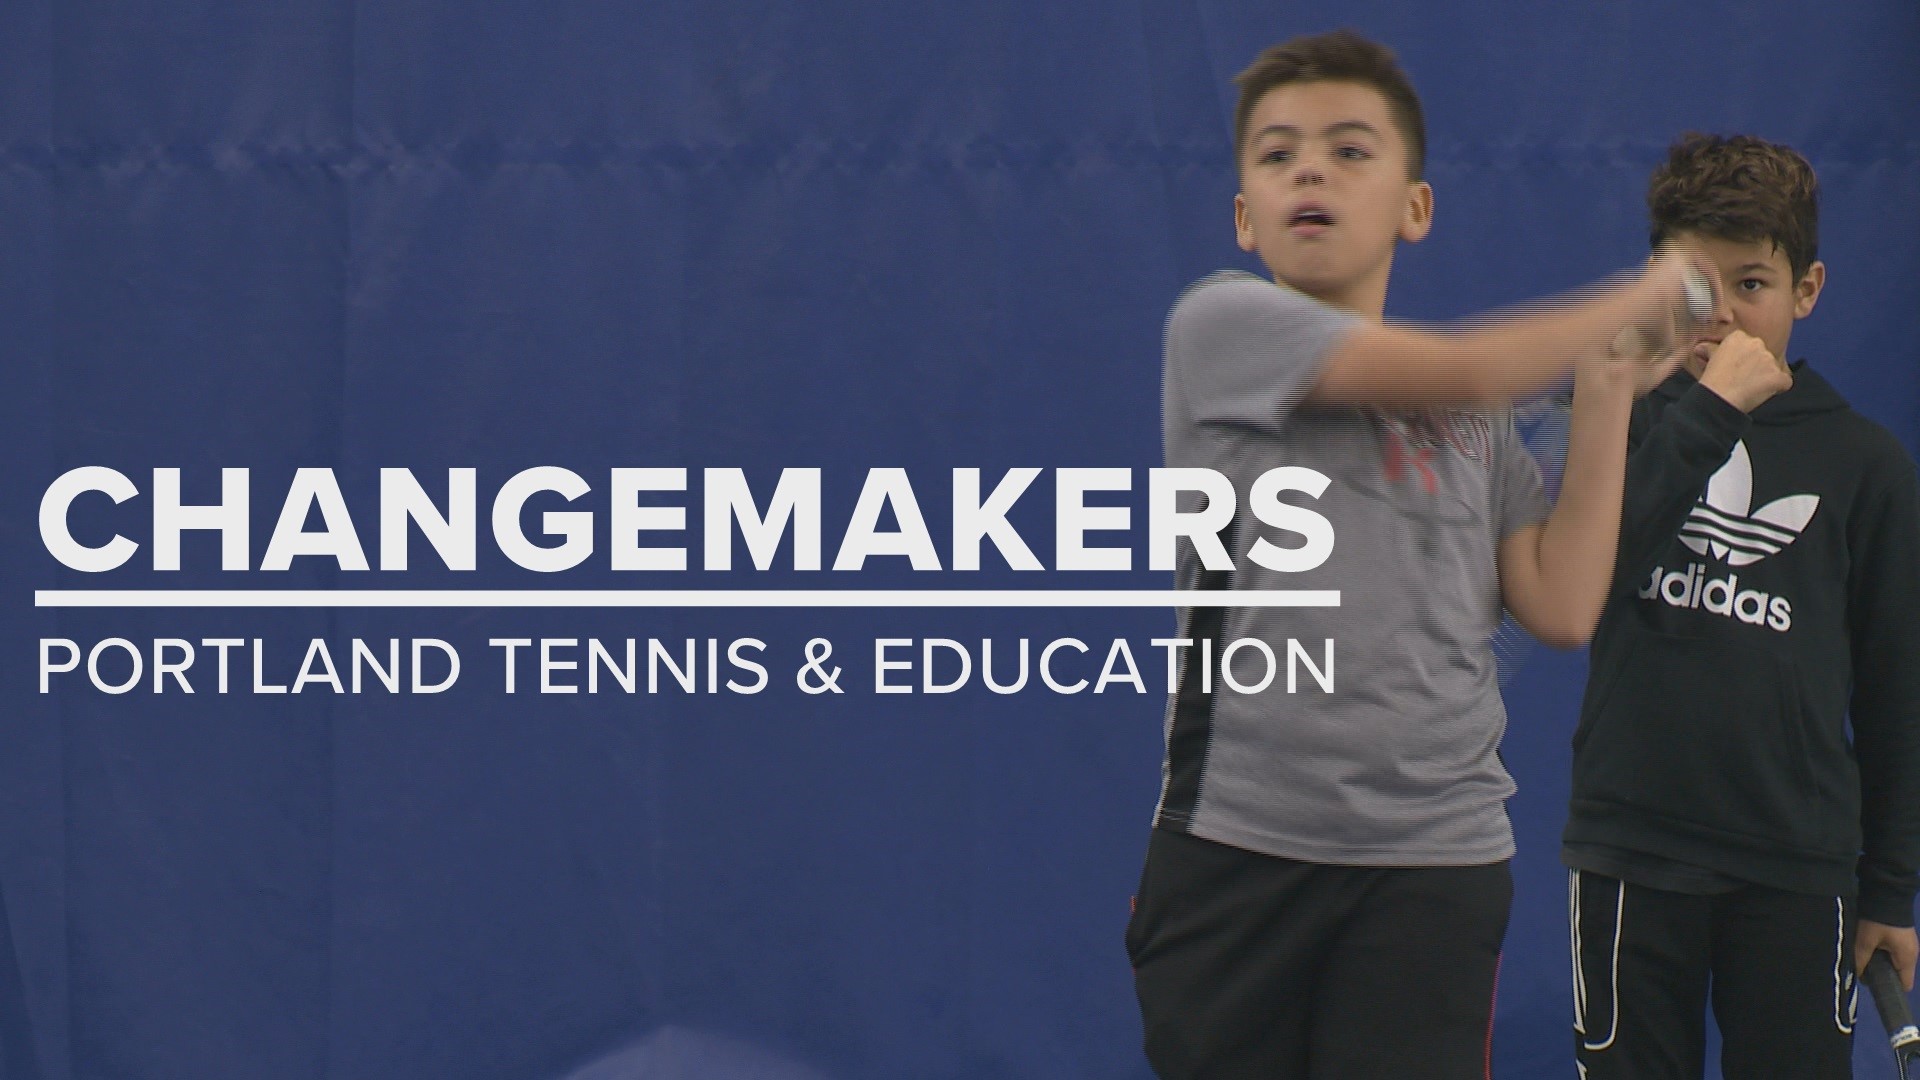 The nonprofit serves up tennis and educational support to kids who otherwise might never pick up a racket.